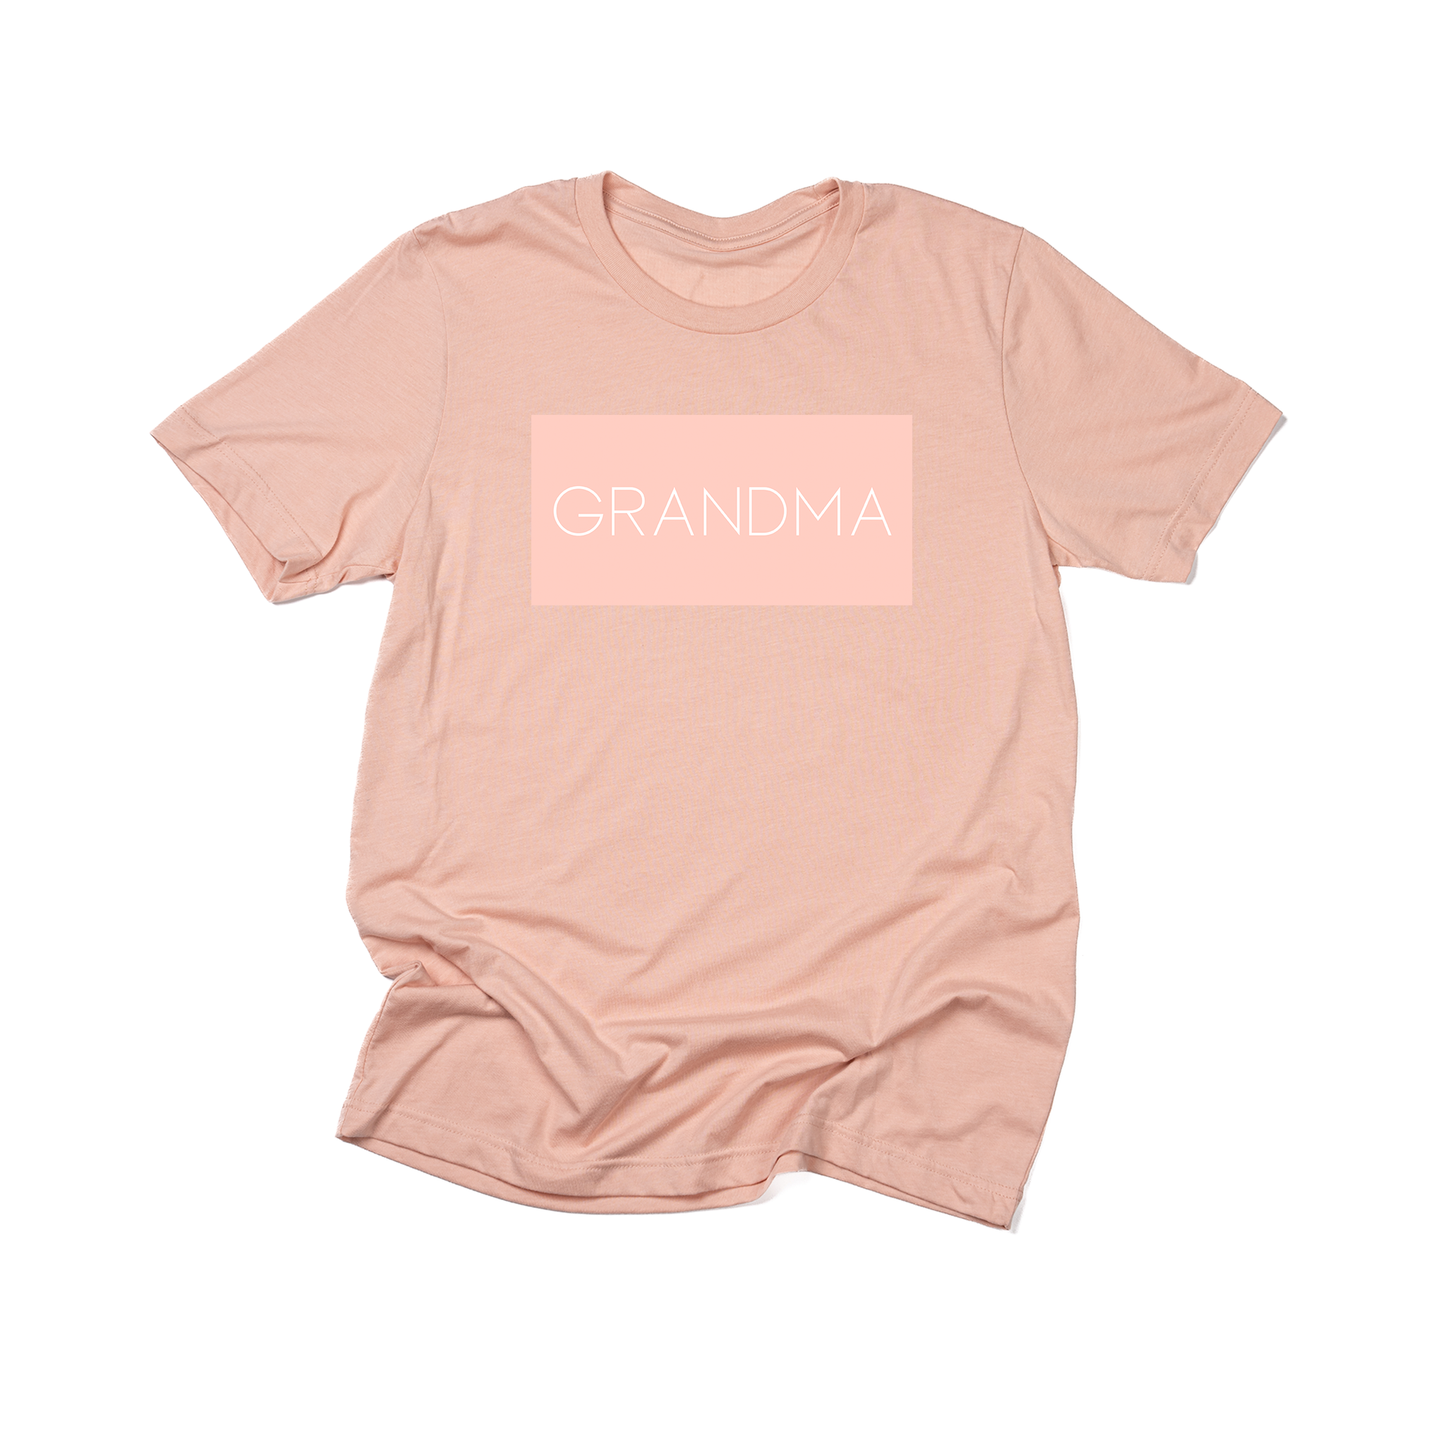 Grandma (Boxed Collection, Ballerina Pink Box/White Text, Across Front) - Tee (Peach)